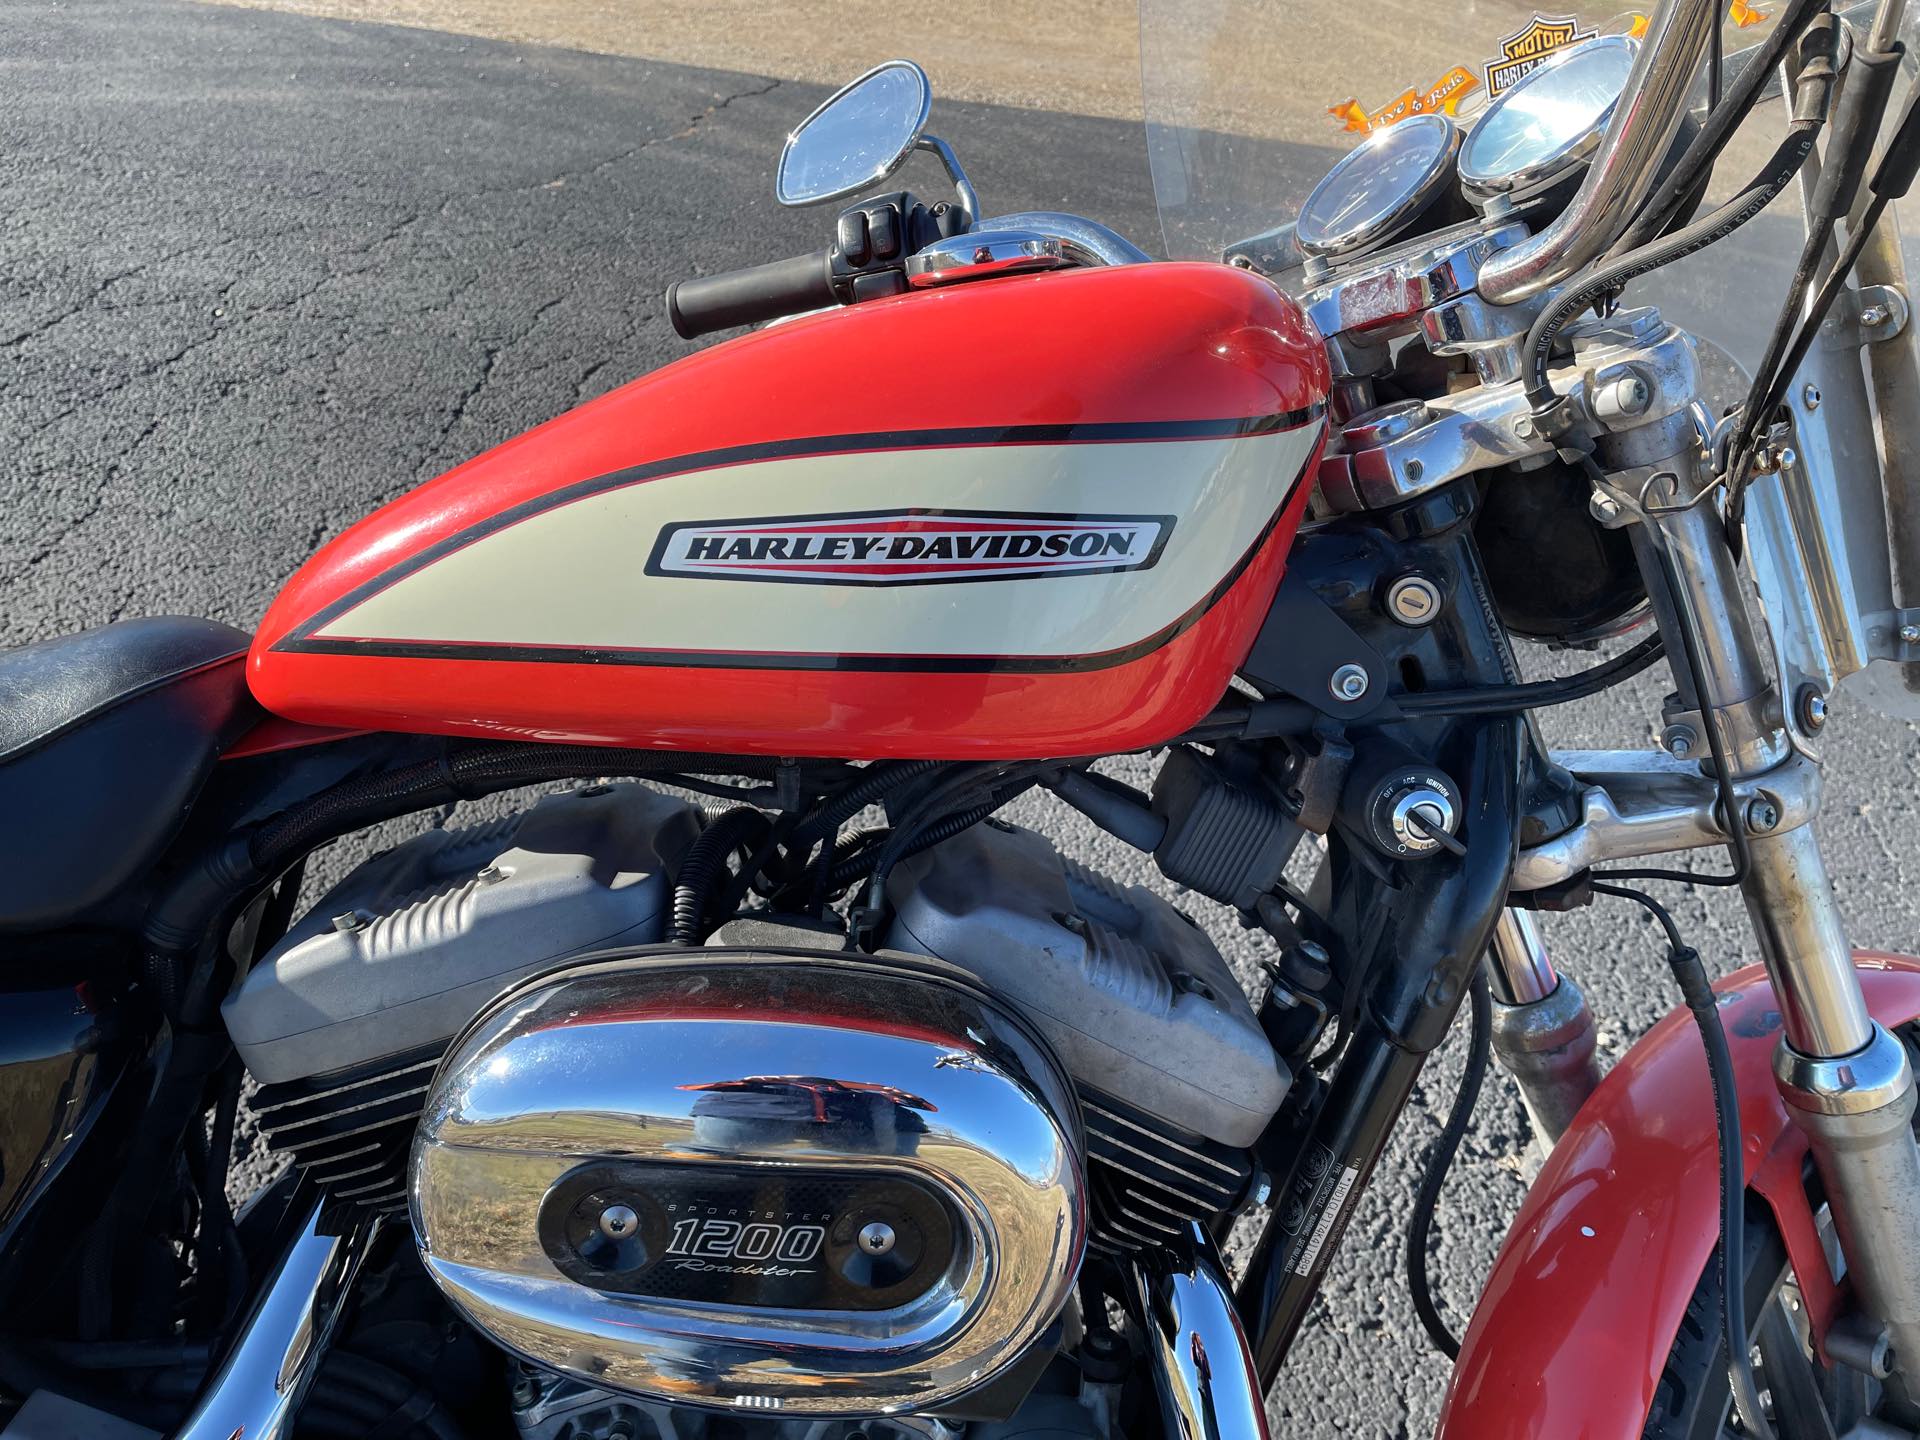 2004 Harley-Davidson Sportster 1200 Roadster at Randy's Cycle